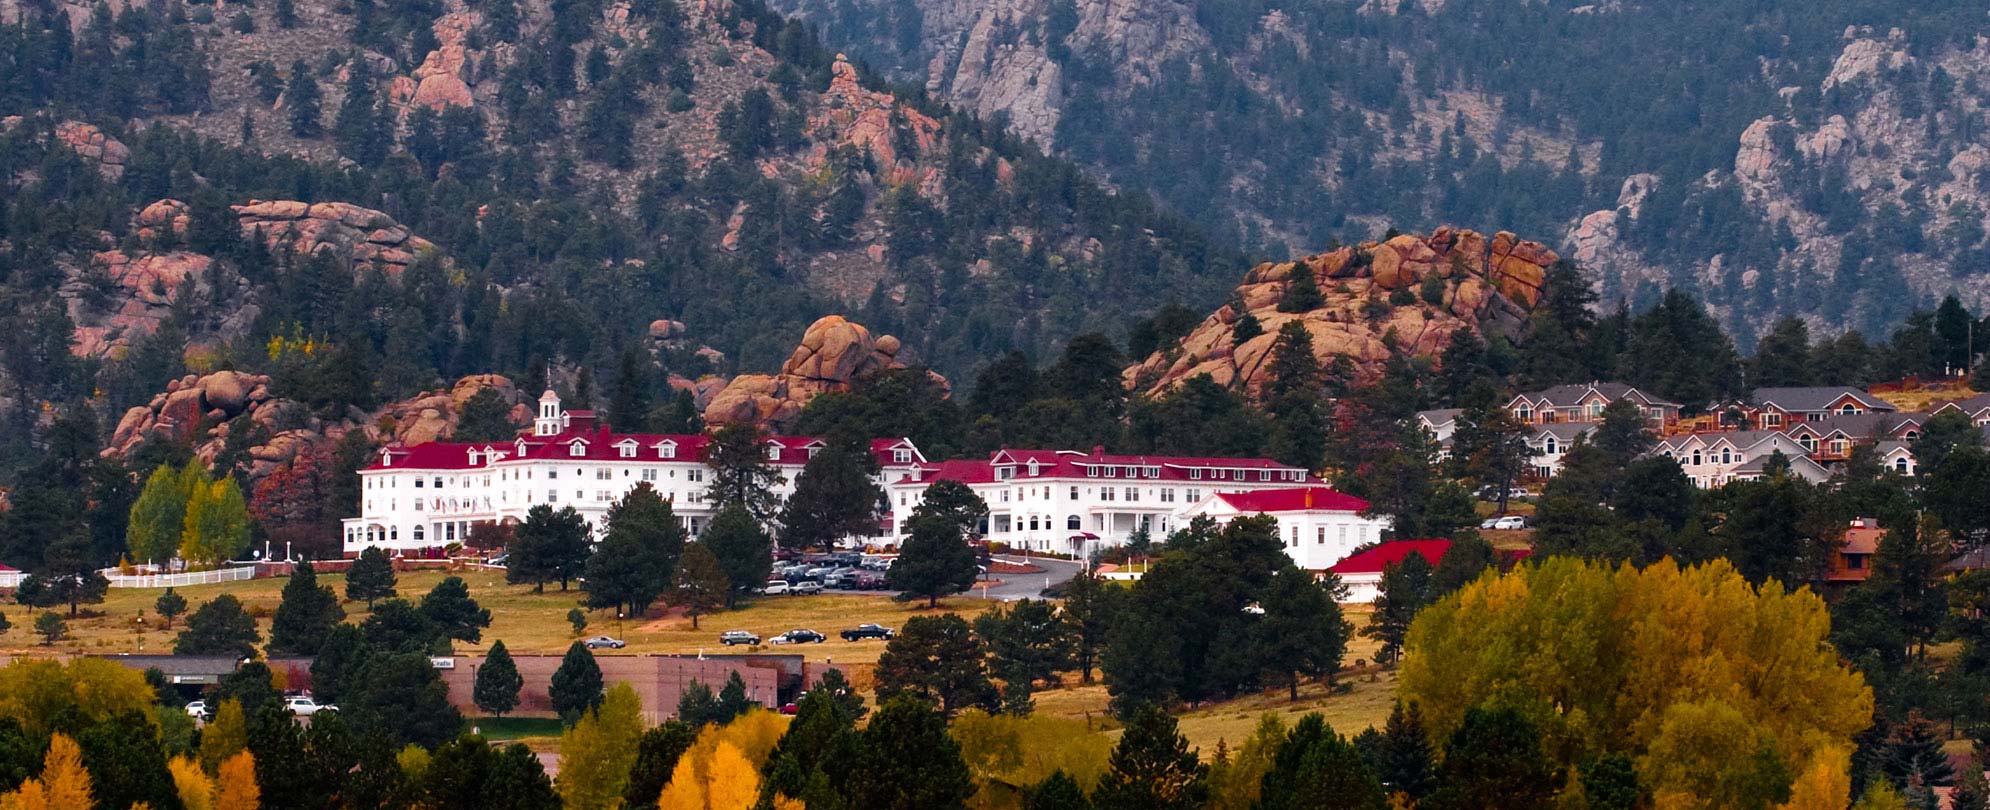 The haunted Stanley Hotel in Estes Park, Colorado, which inspired The Shining by Stephen King